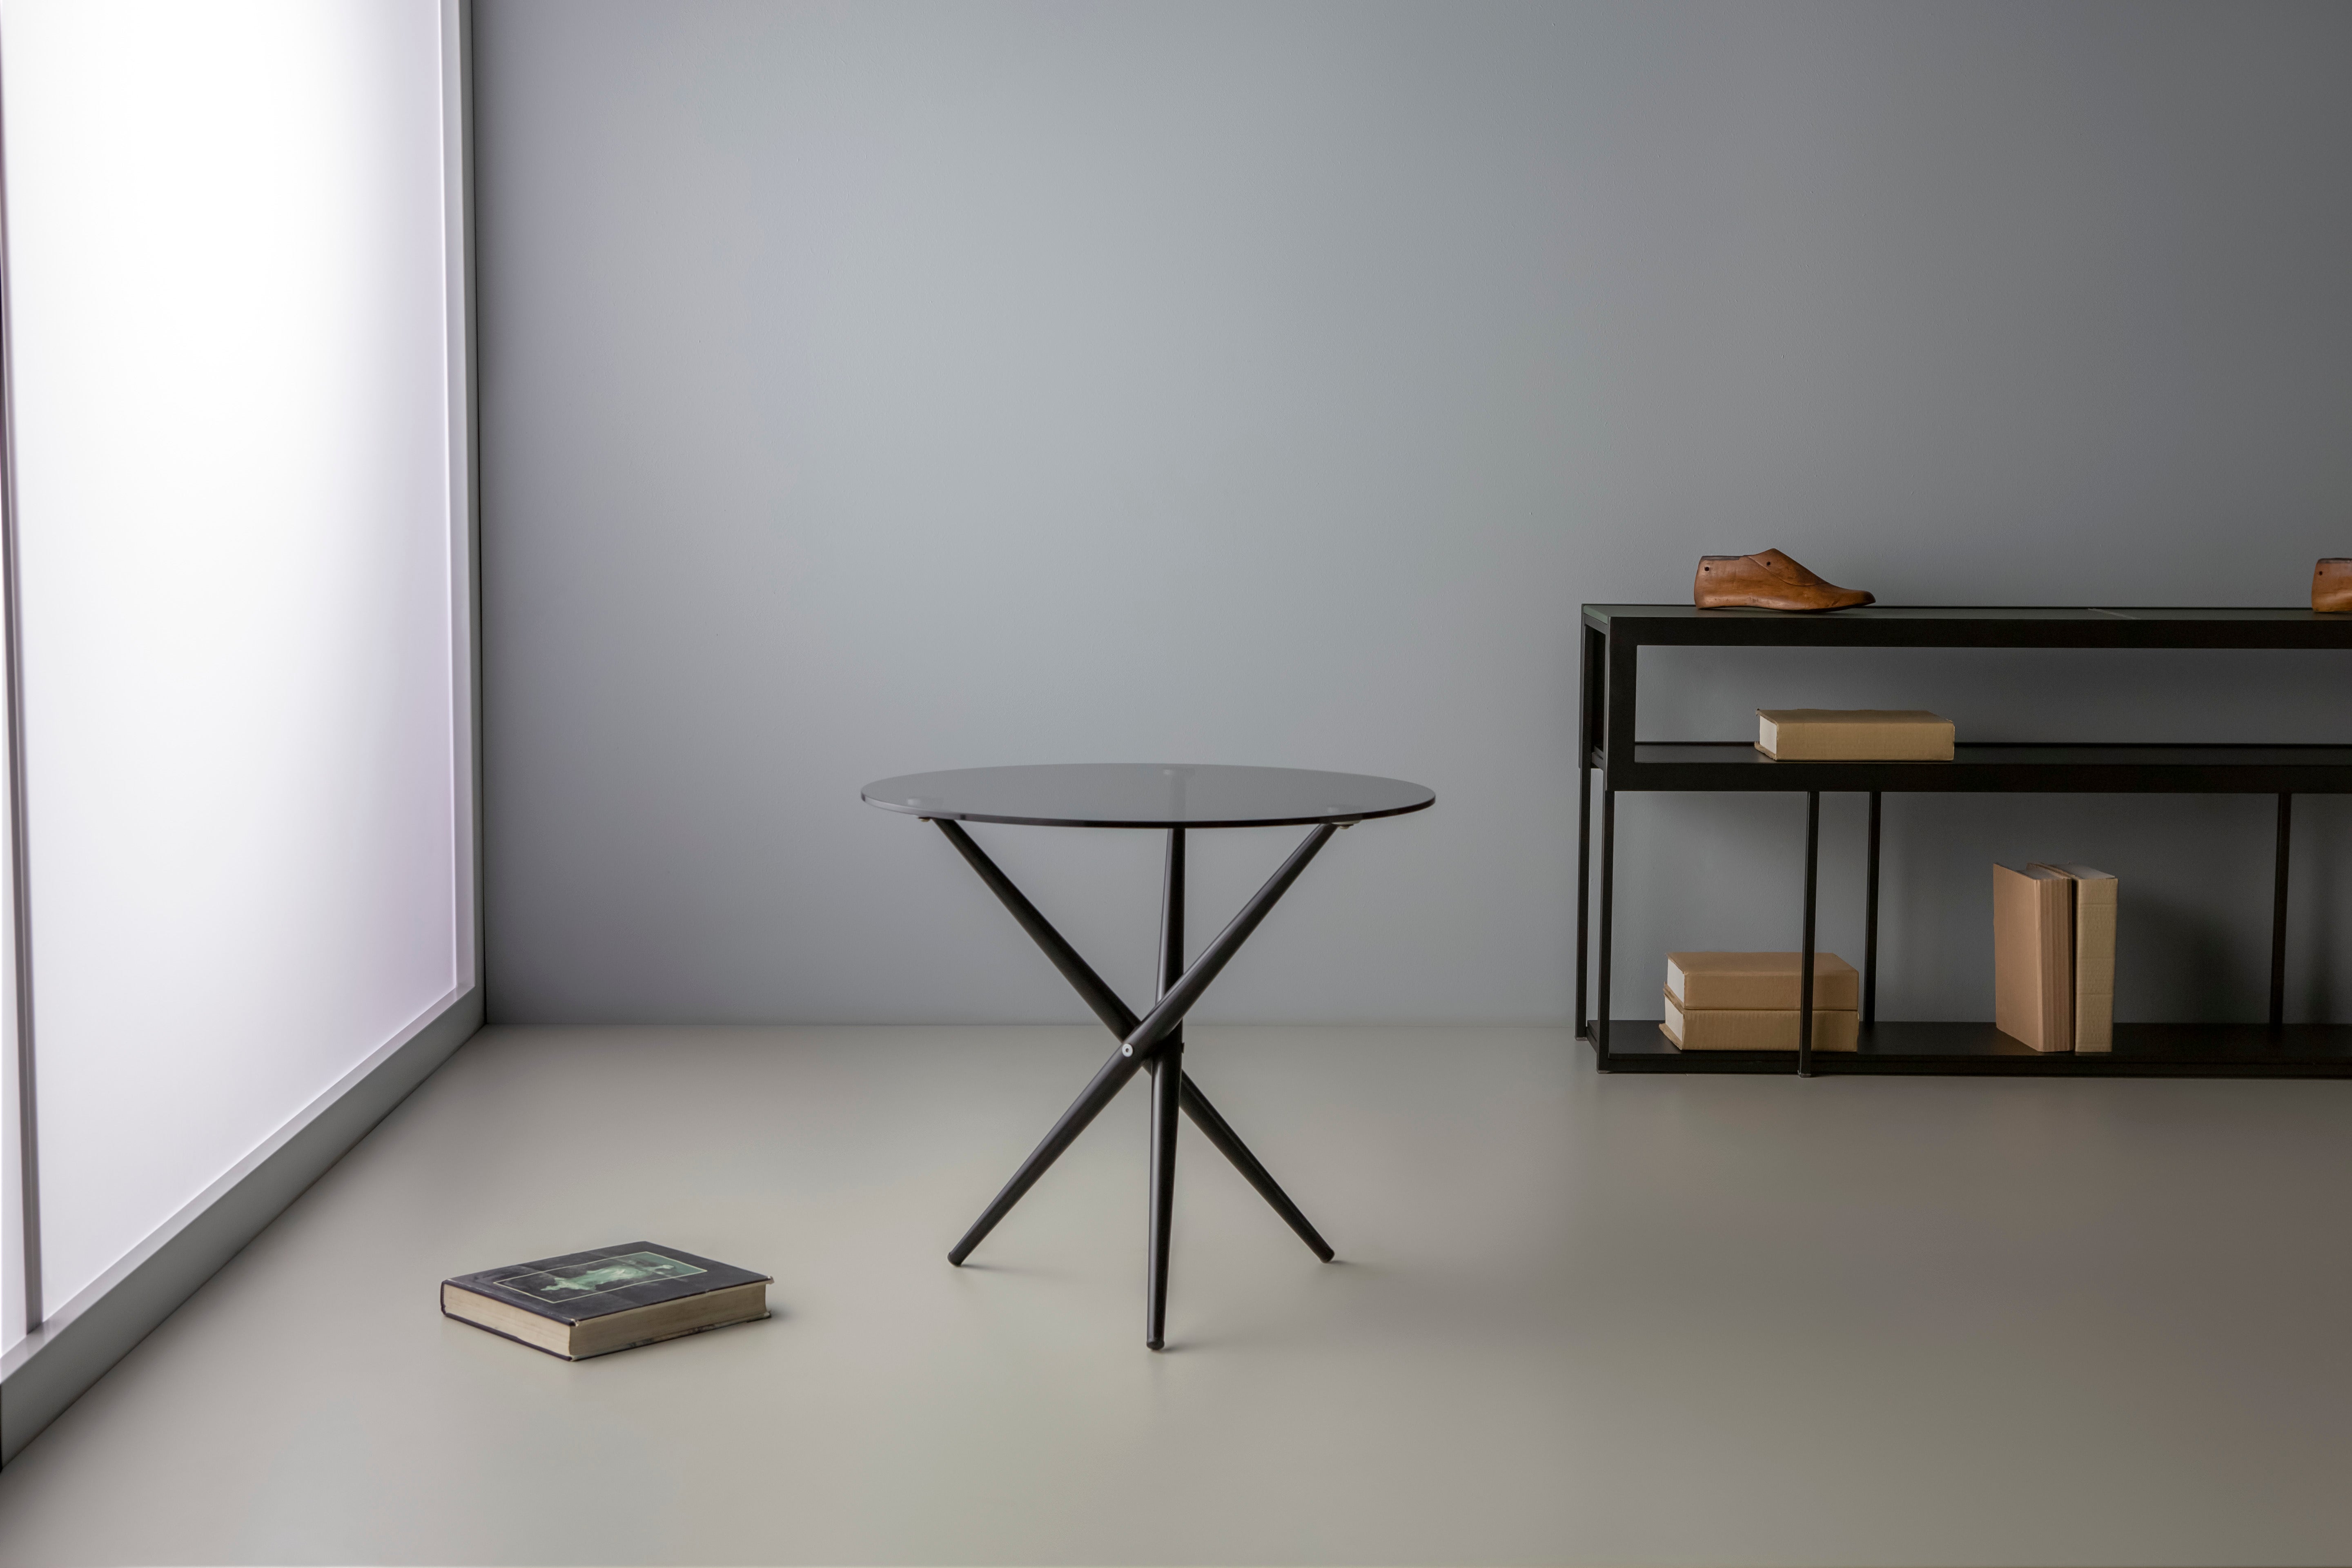 Pégasus Side Table by Doimo Brasil
Dimensions:  D 60 x H 55 cm 
Materials: Base: Veneer, Top: Clear glass. 


With the intention of providing good taste and personality, Doimo deciphers trends and follows the evolution of man and his space. To this